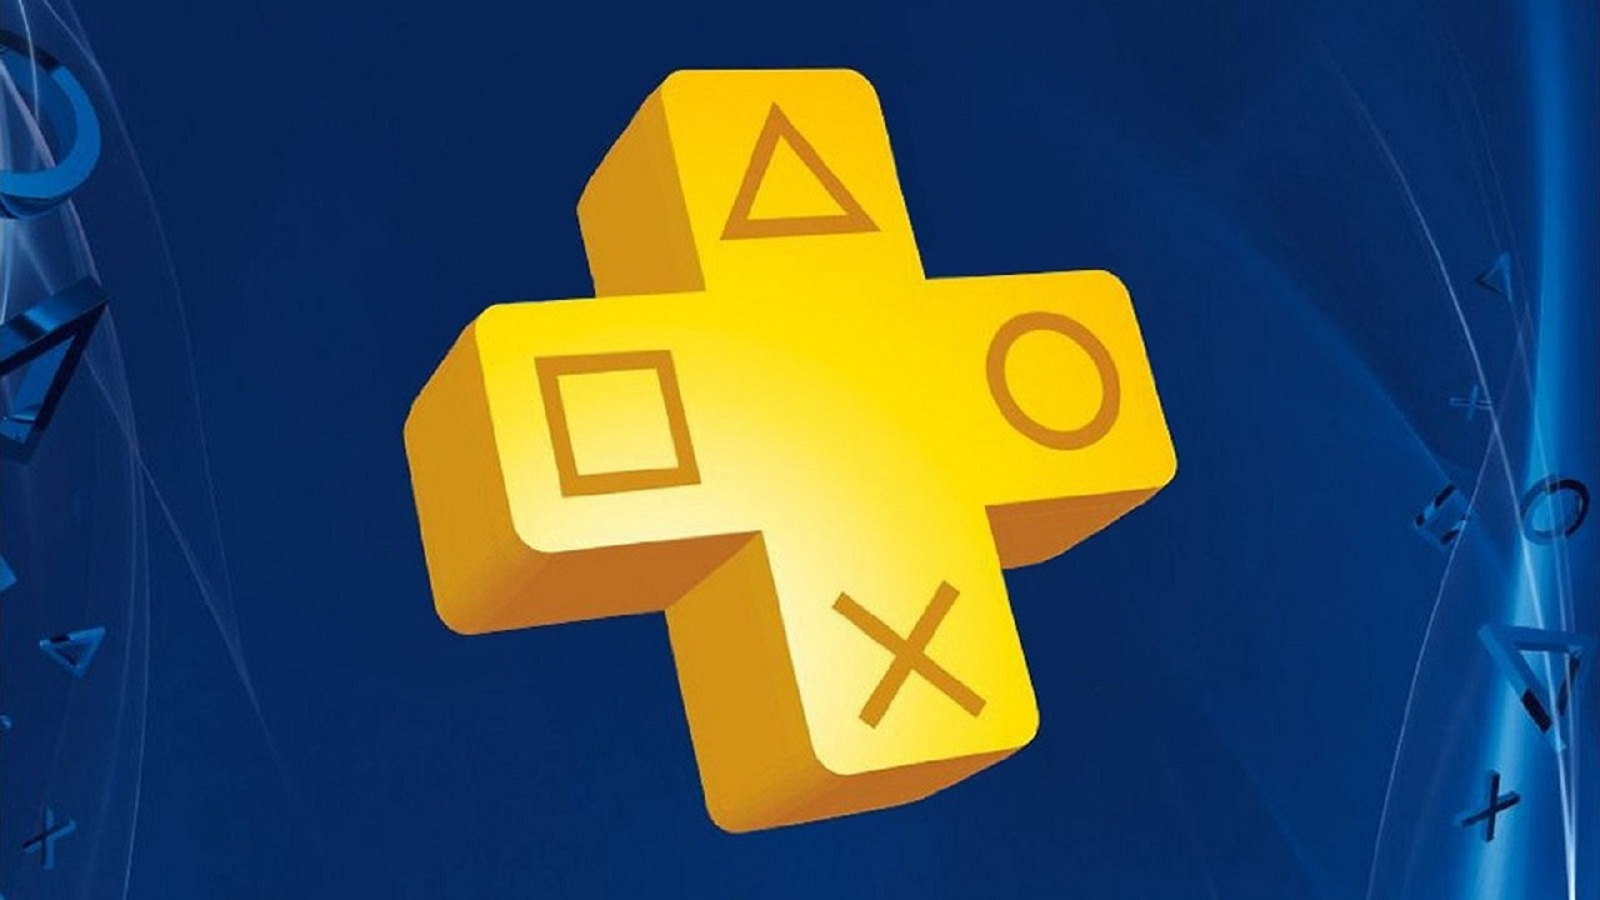 PlayStation Plus is going to cost a little extra!!#playstation5 #plays, Playstation